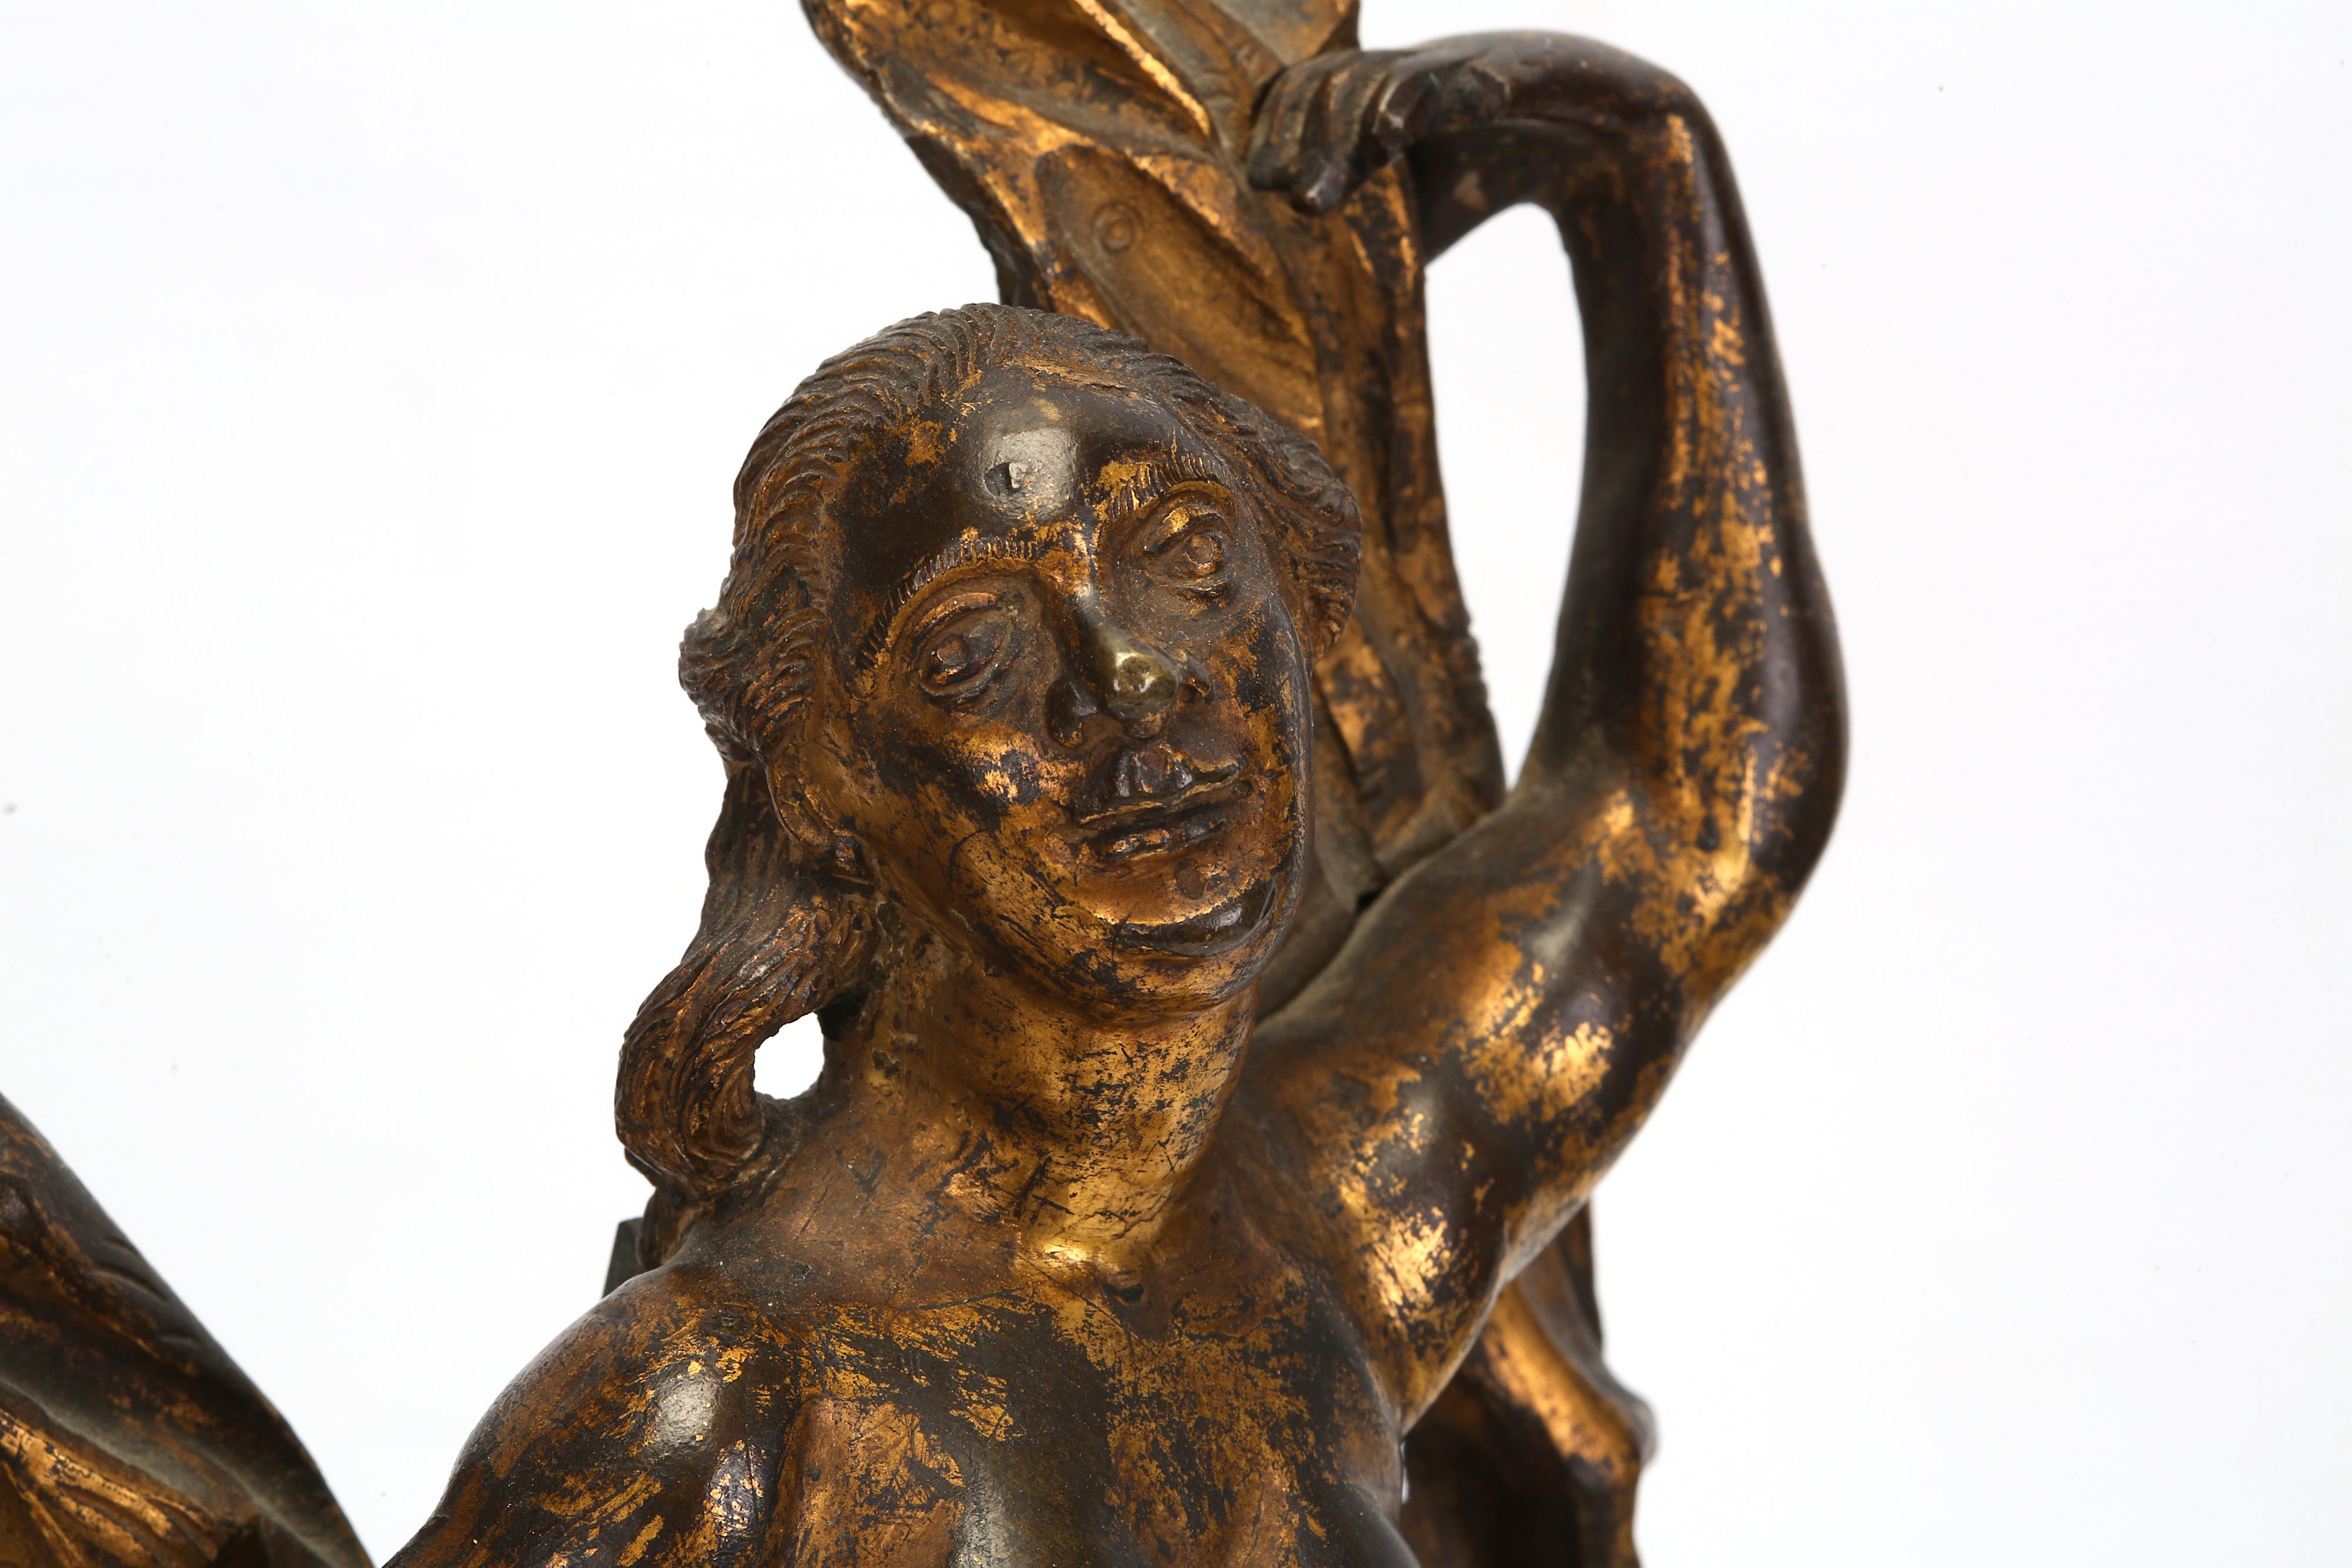 A LATE 17TH / EARLY 18TH CENTURY GERMAN GILT BRONZE FIGURE OF FORTUNA - Image 6 of 7